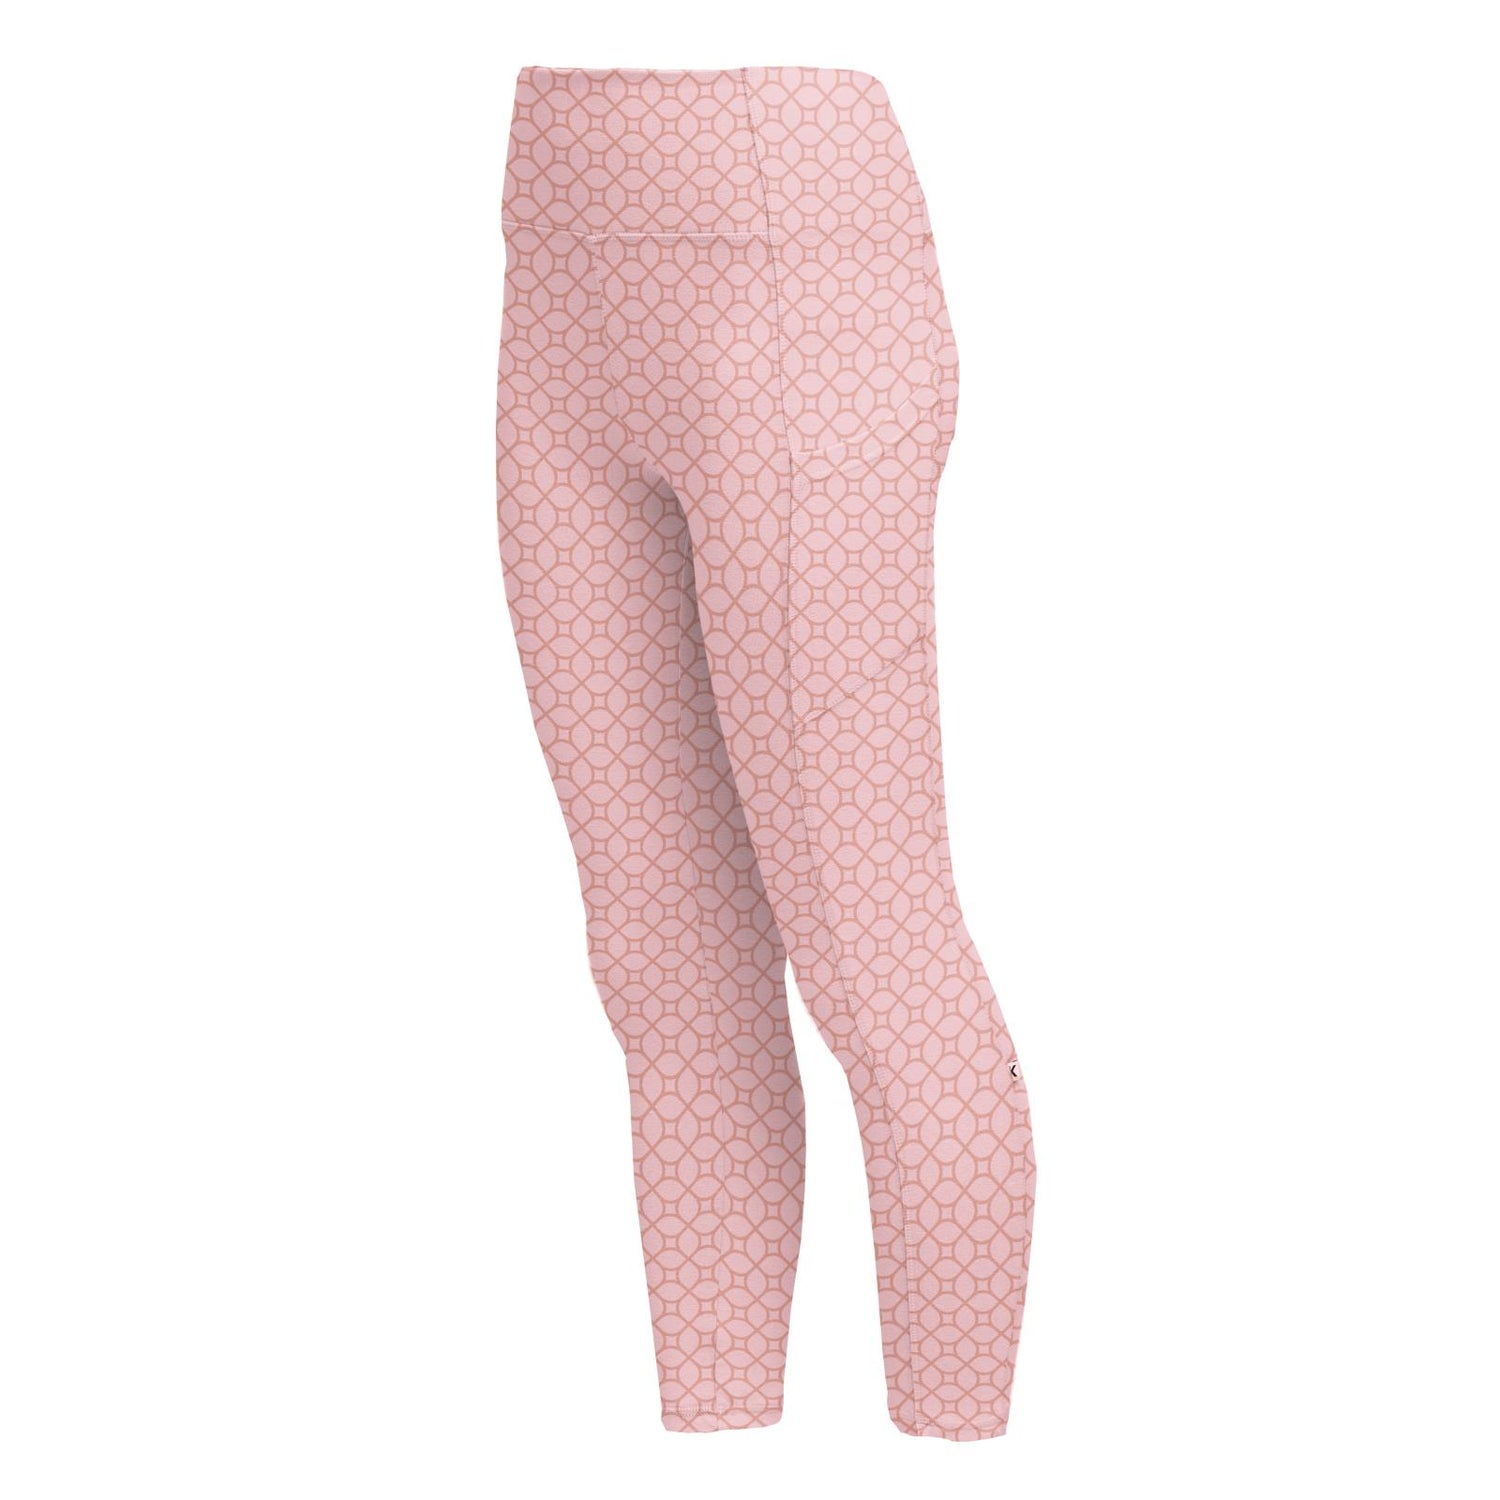 Women's Print Luxe Stretch 7/8 Leggings with Pockets in Blush Spring Lattice